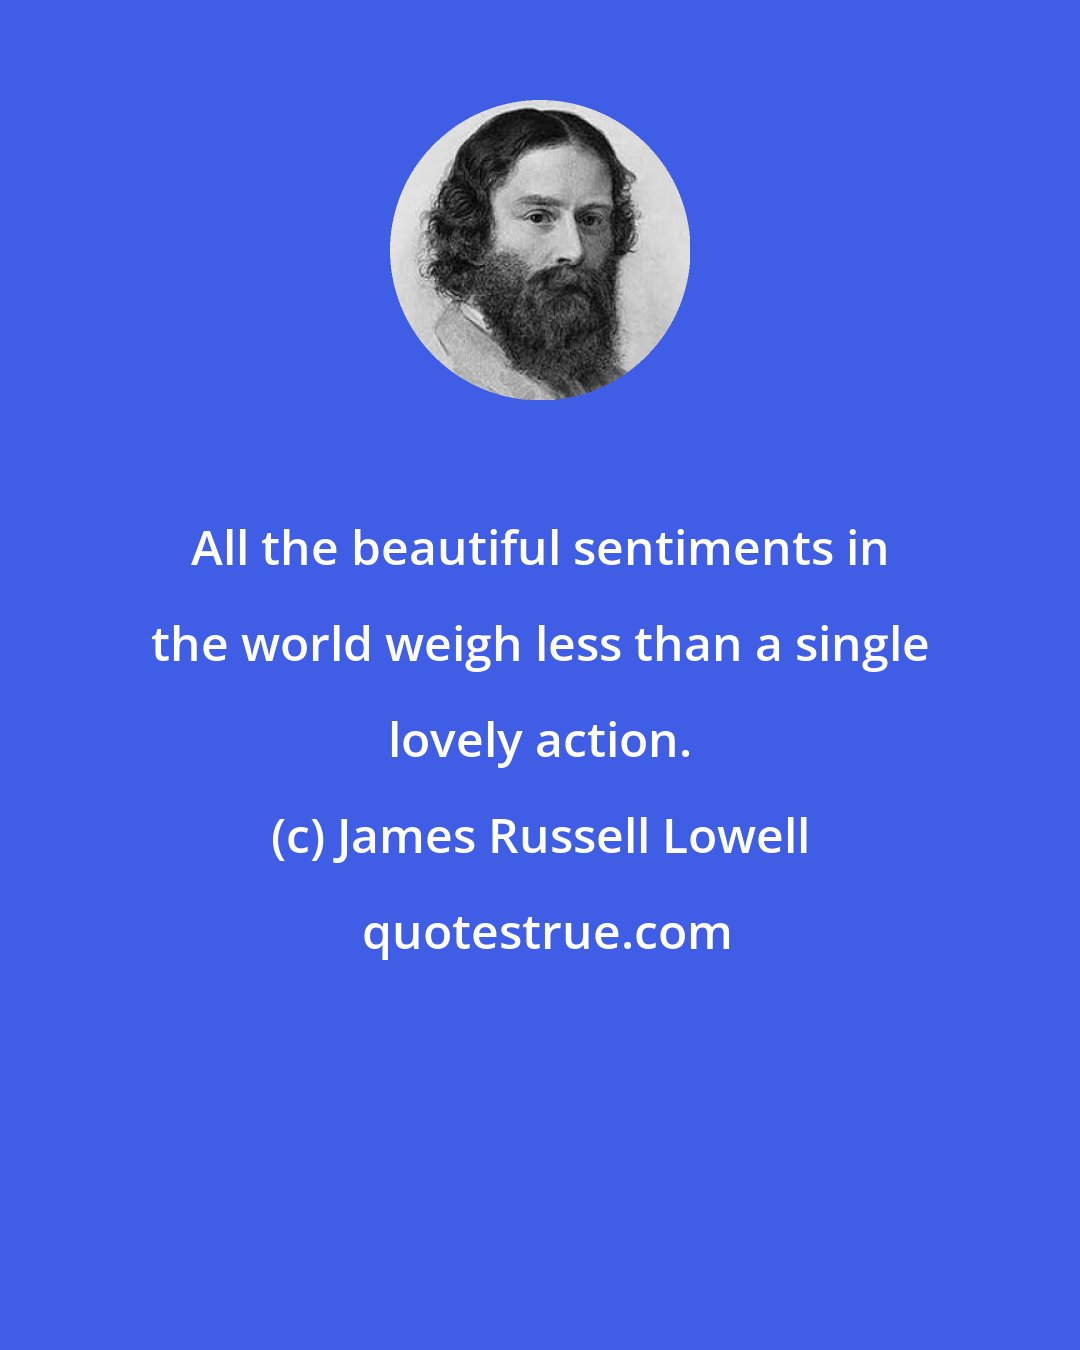 James Russell Lowell: All the beautiful sentiments in the world weigh less than a single lovely action.